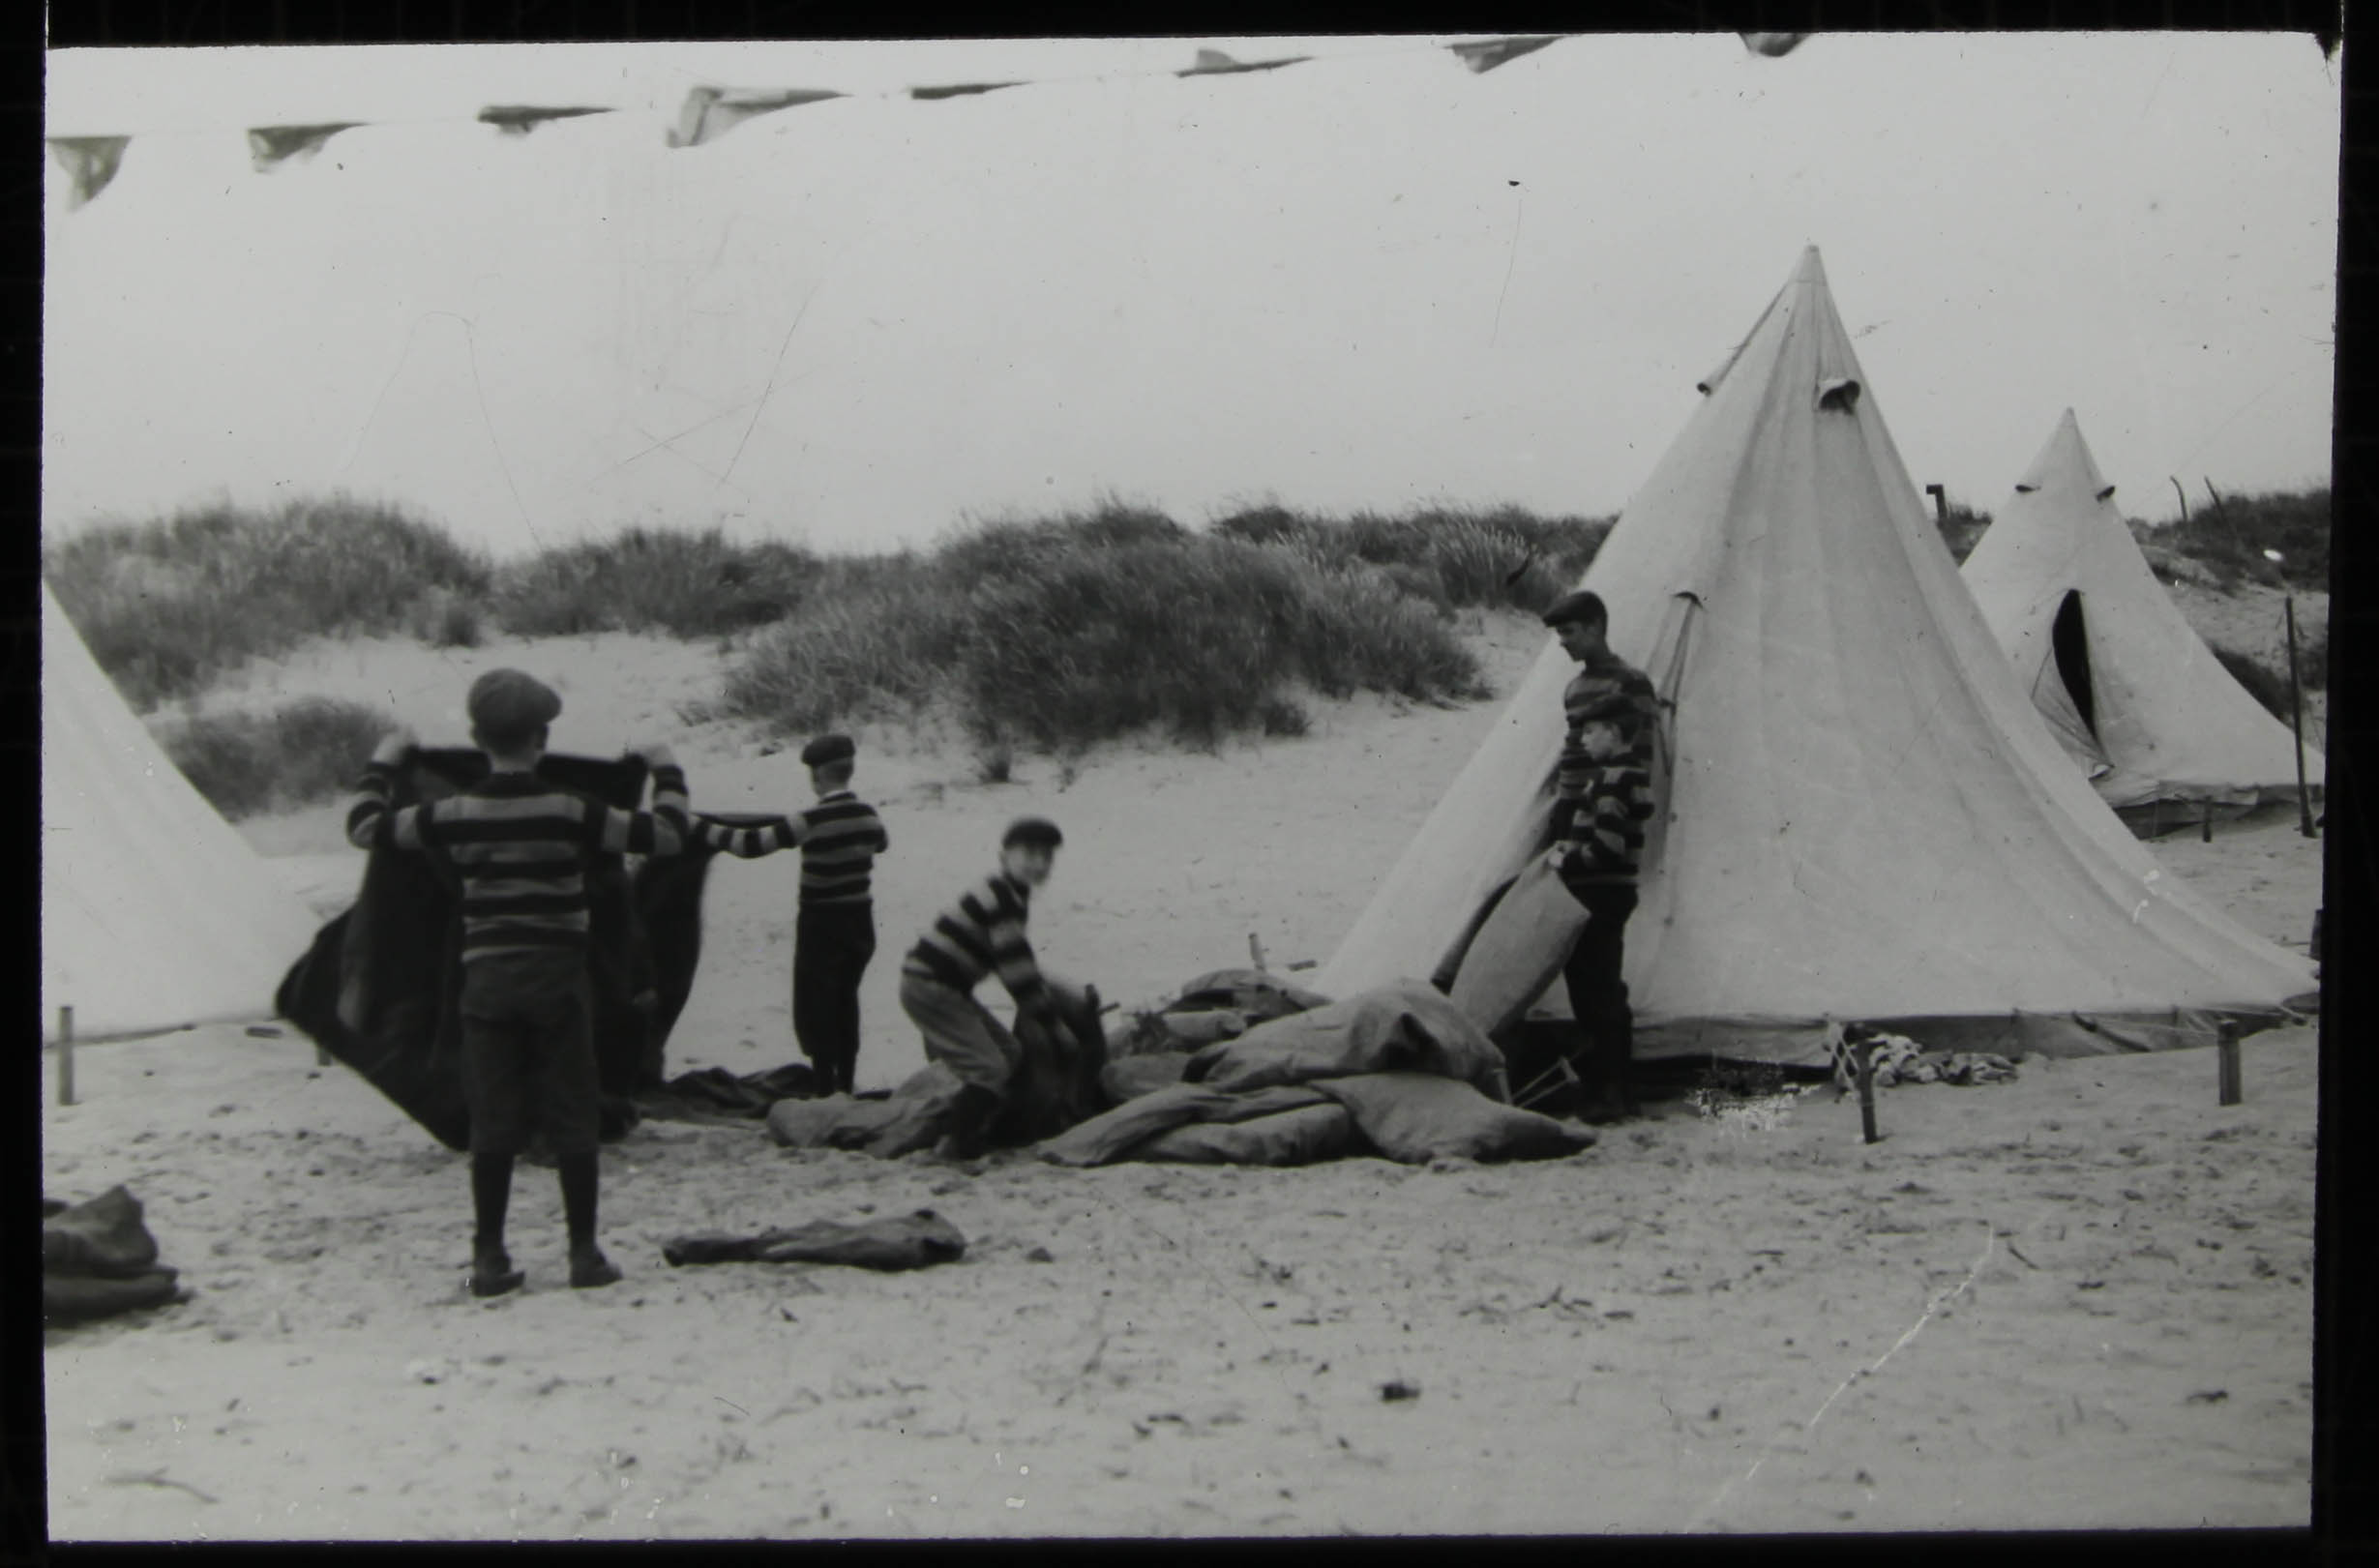 Boys pitching tents on the dunes - 